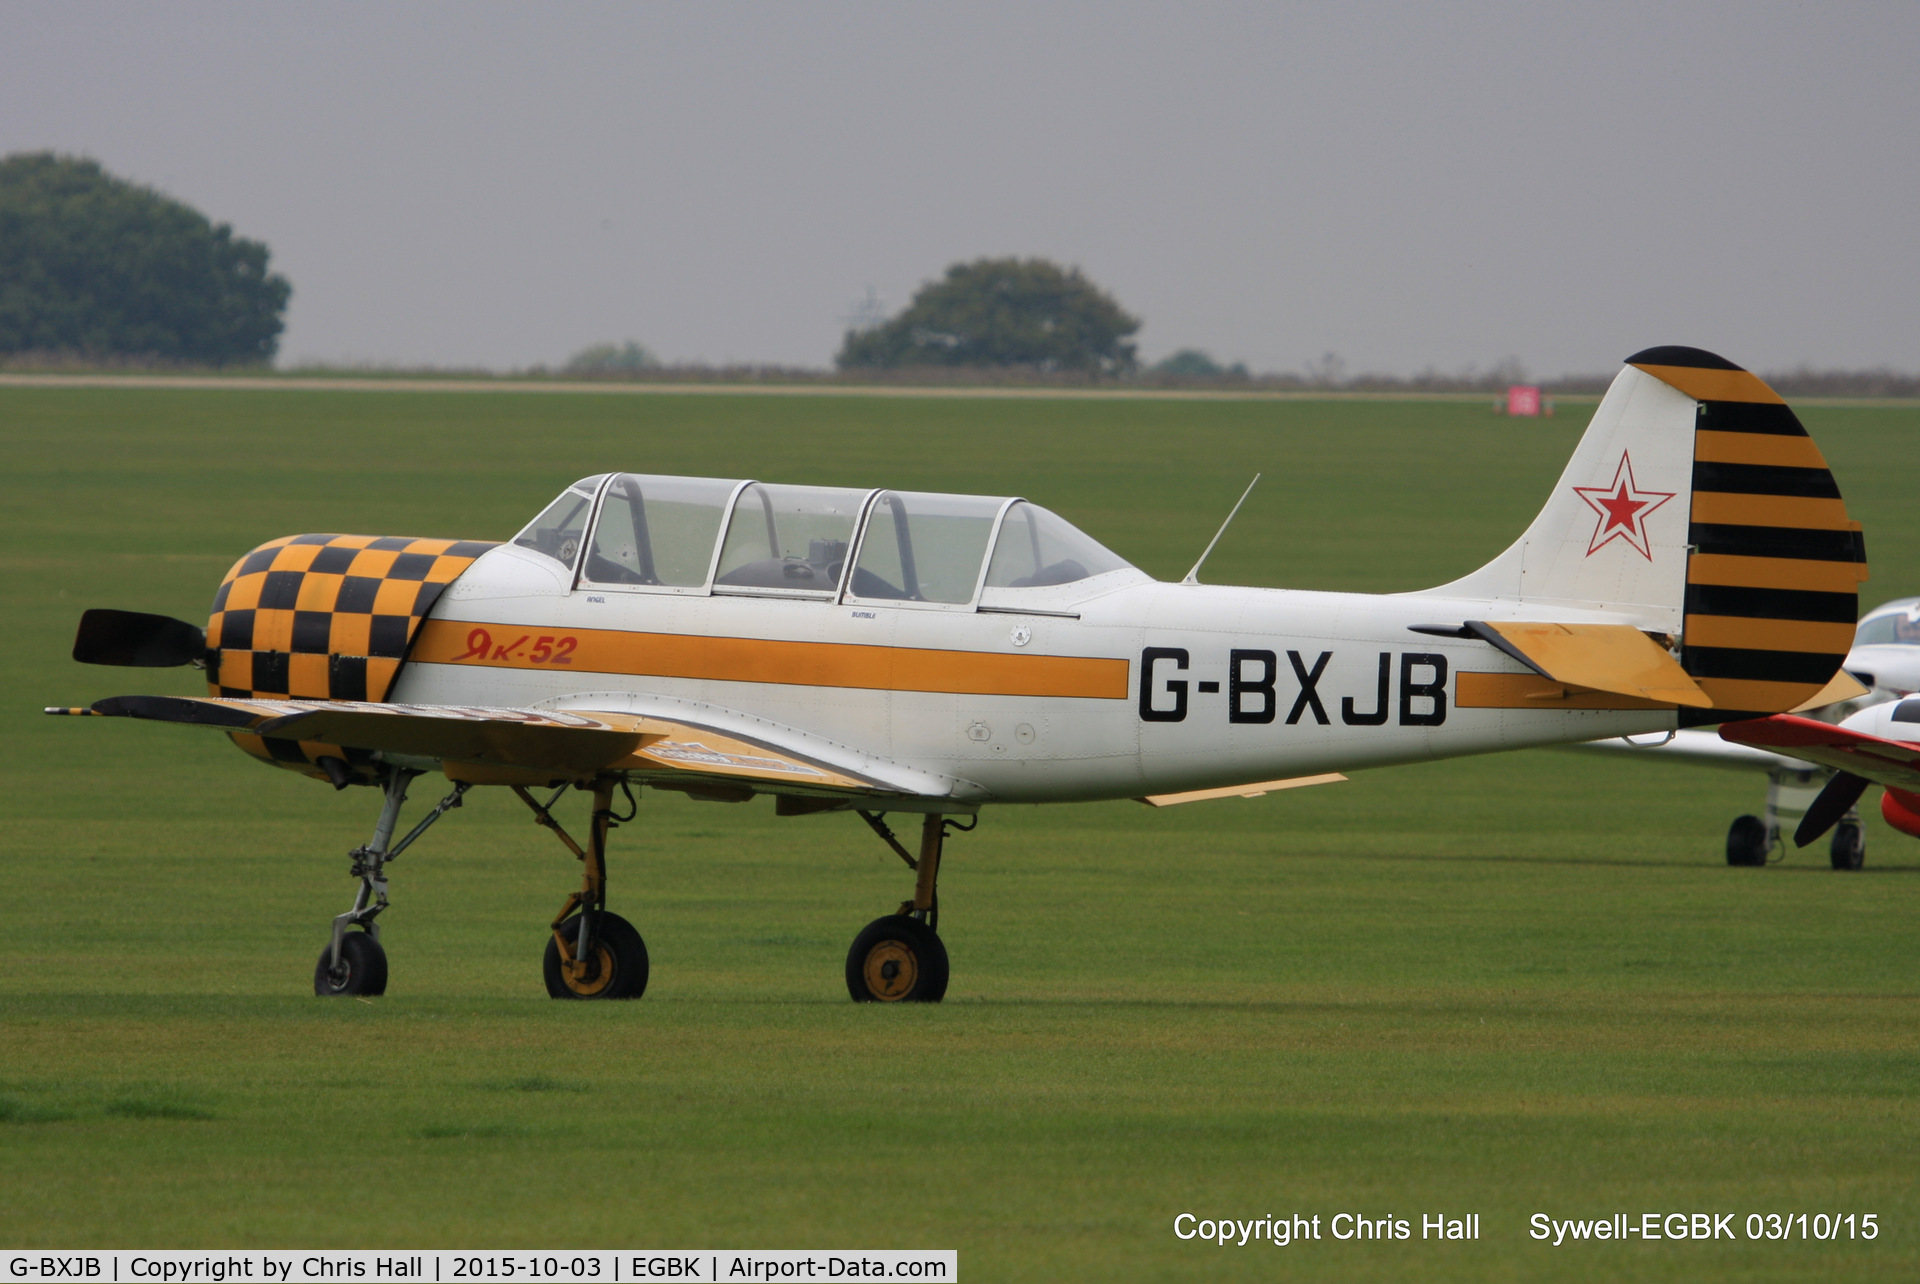 G-BXJB, 1987 Bacau Yak-52 C/N 877403, at The Radial And Training Aircraft Fly-in